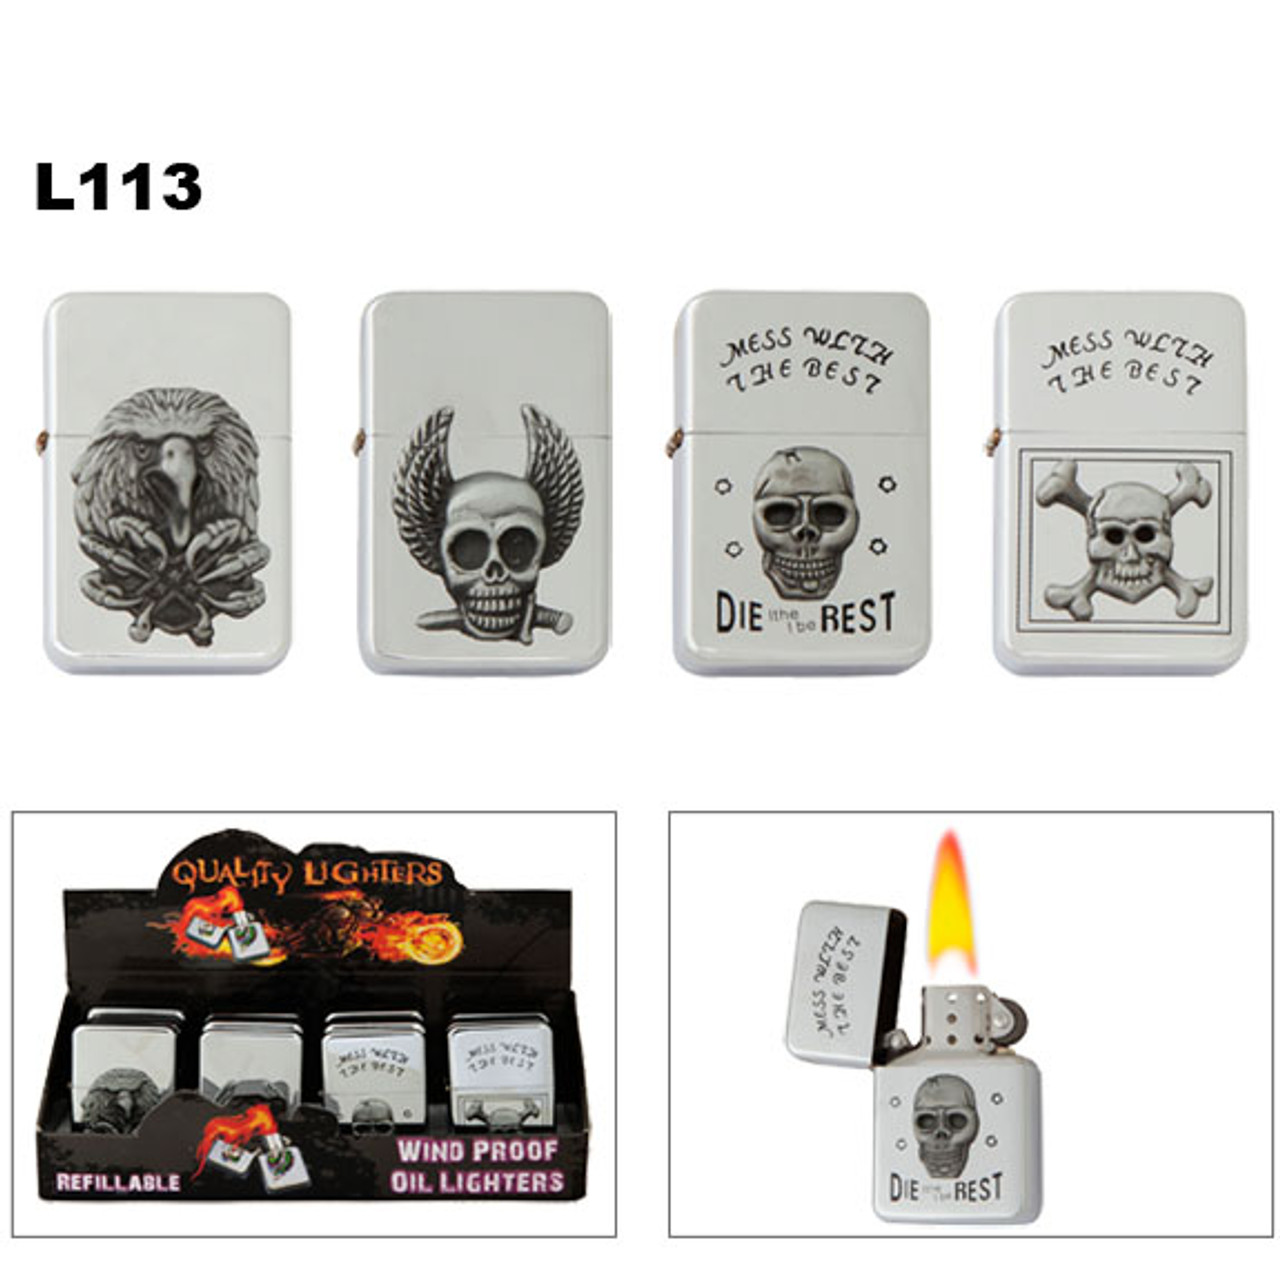 Refillable Wholesale Oil Lighters with assorted skull emblems